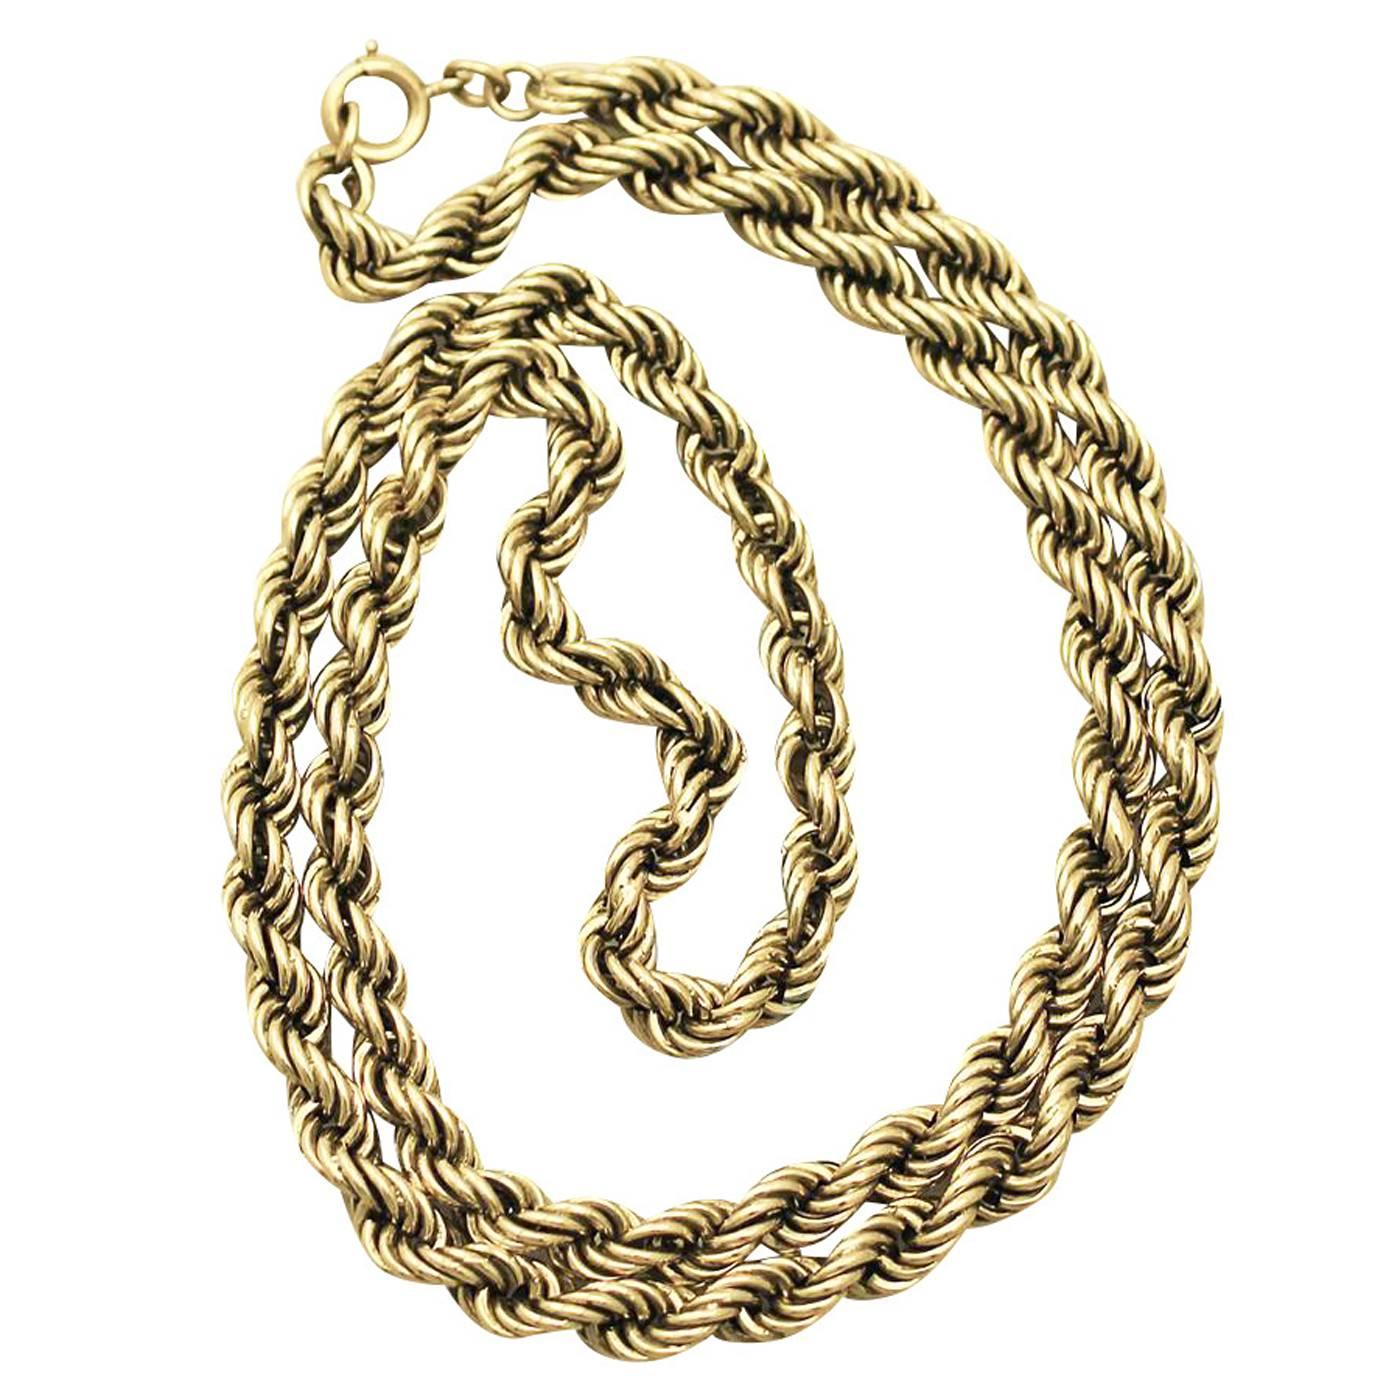 9k Yellow Gold Rope Twist Chain Necklace - Antique Victorian